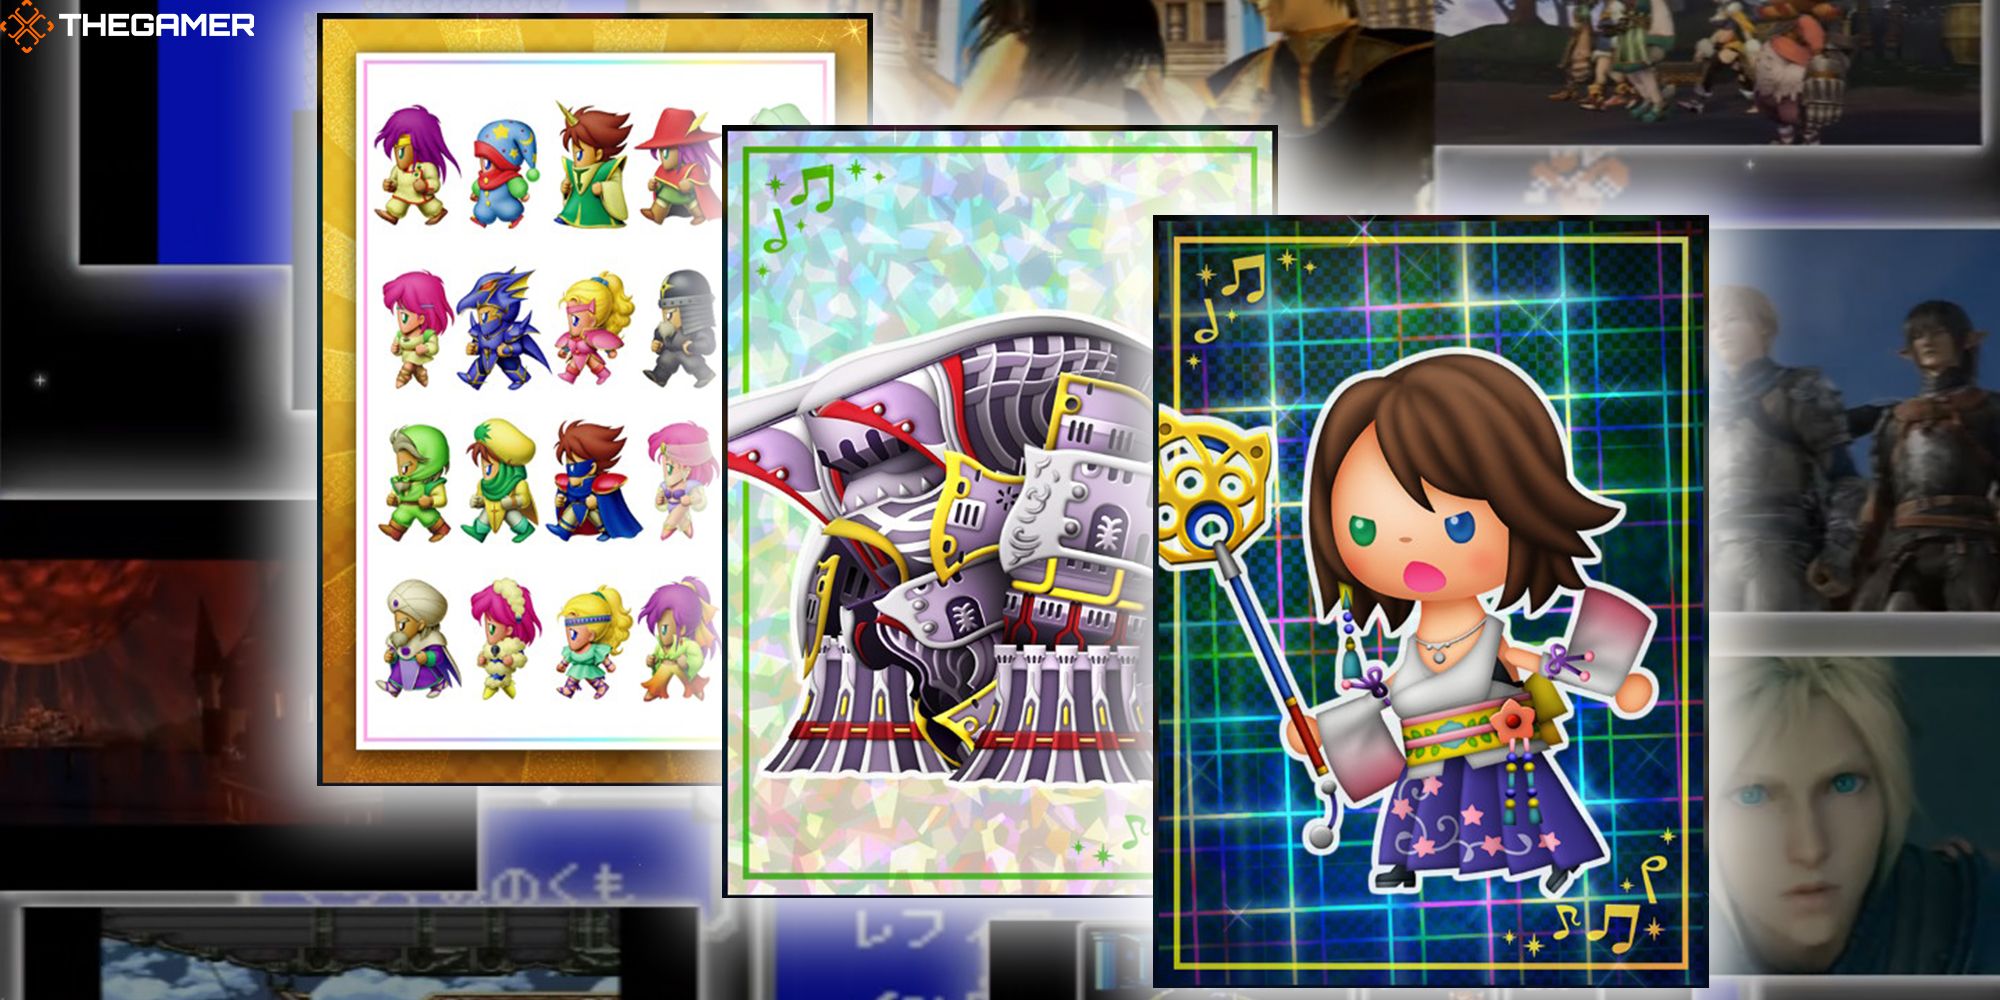 A Final Fantasy V Memory CollectaCard, an Alexander Summon CollectaCard, and a Premium Yuna Character CollectaCard against a background of scenes from various Final Fantasy games featured in Theatrhythm: Final Bar Line.